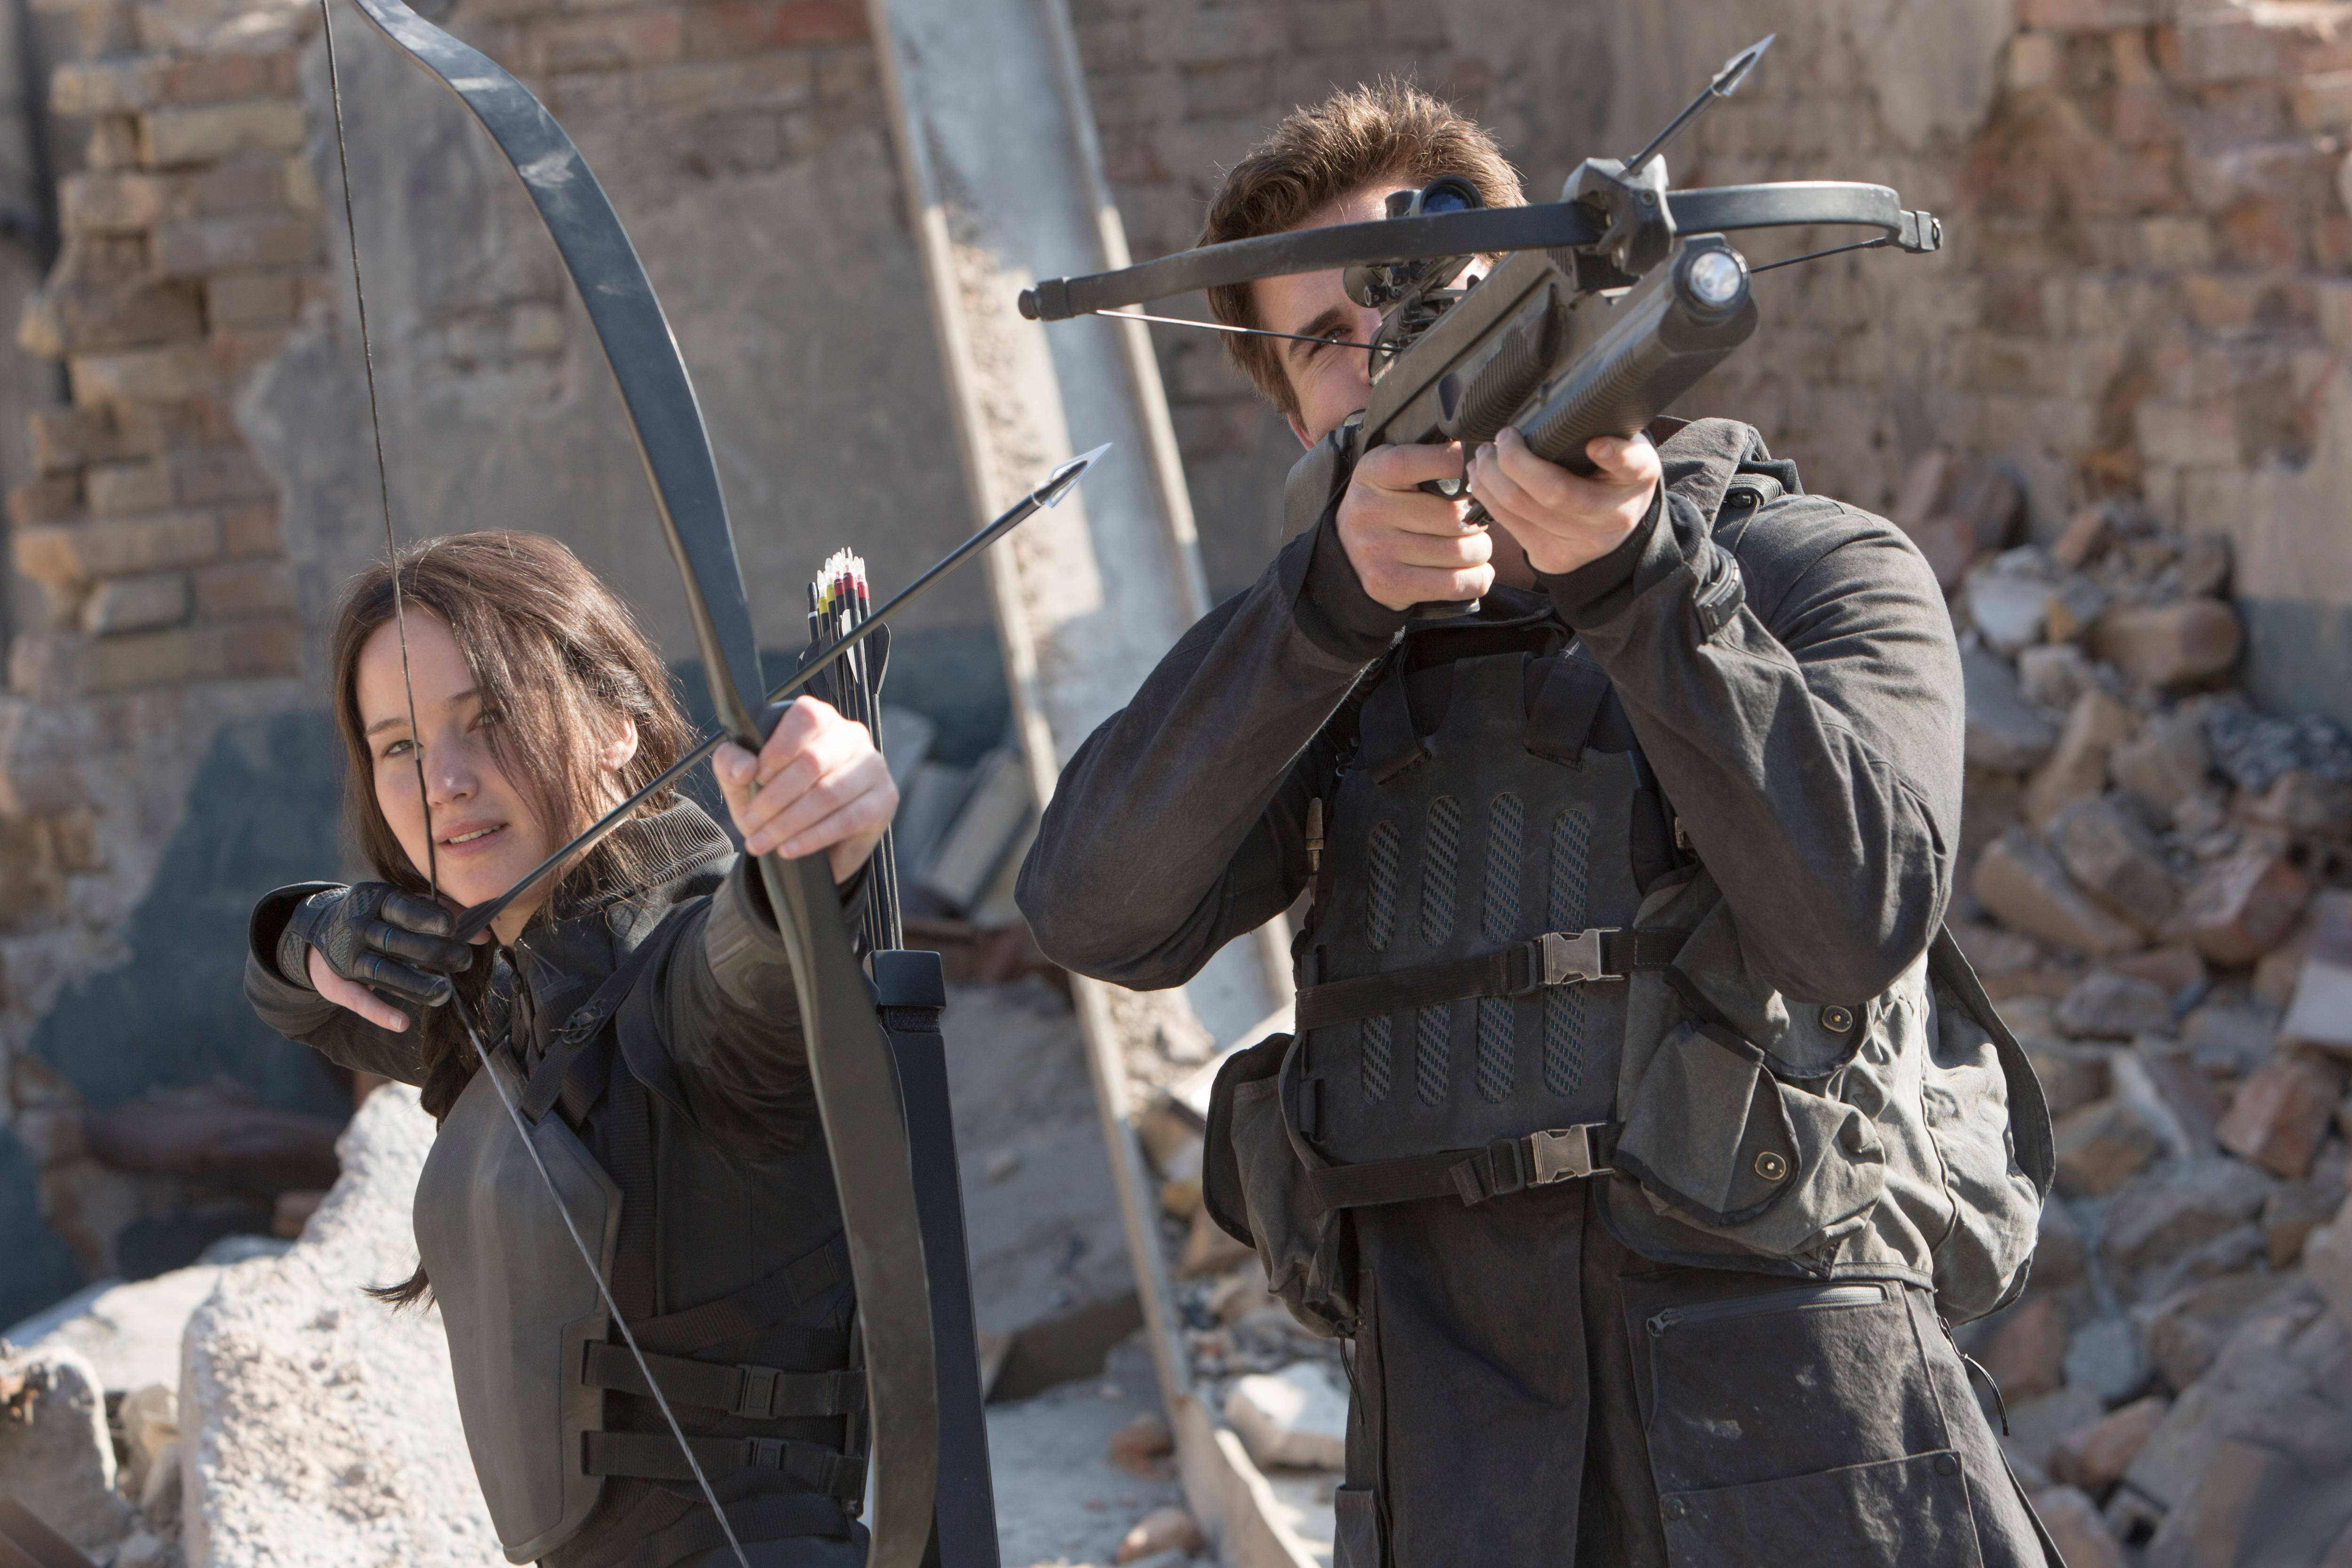 Watch: The Revoution Rises In New Trailer For 'The Hunger Games